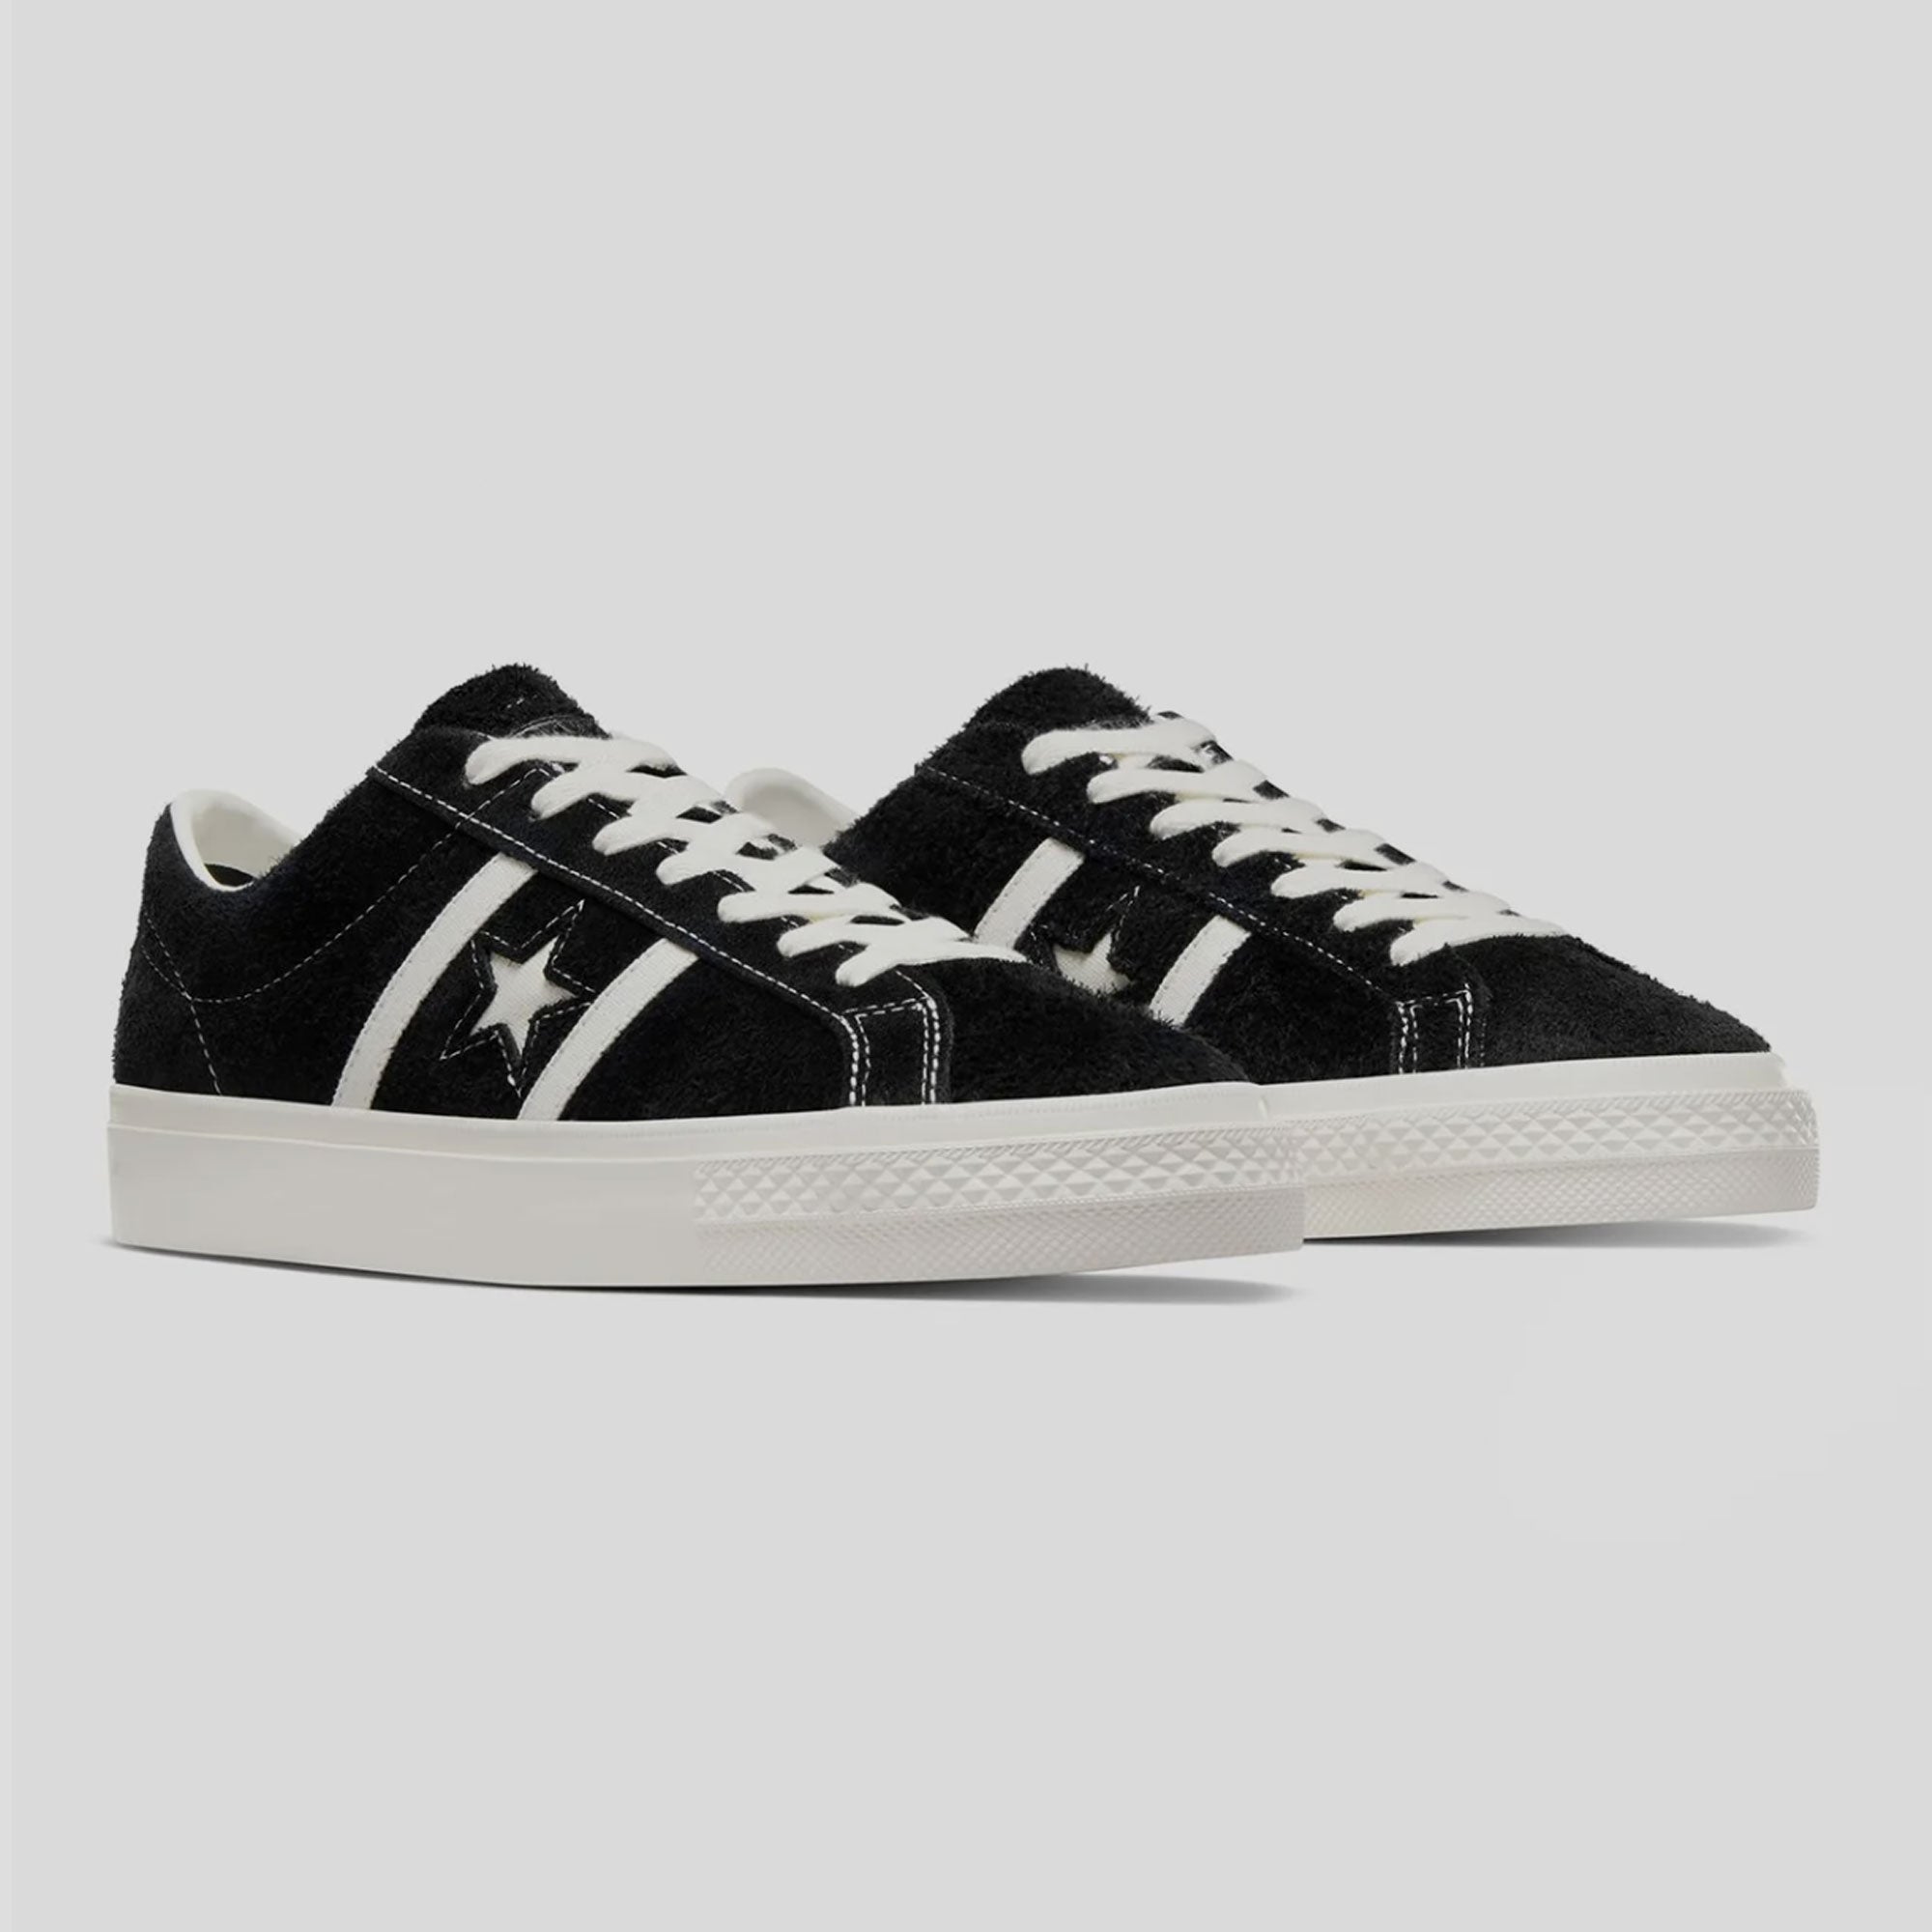 Converse Cons One Star Academy Pro Ox - Black / Egret